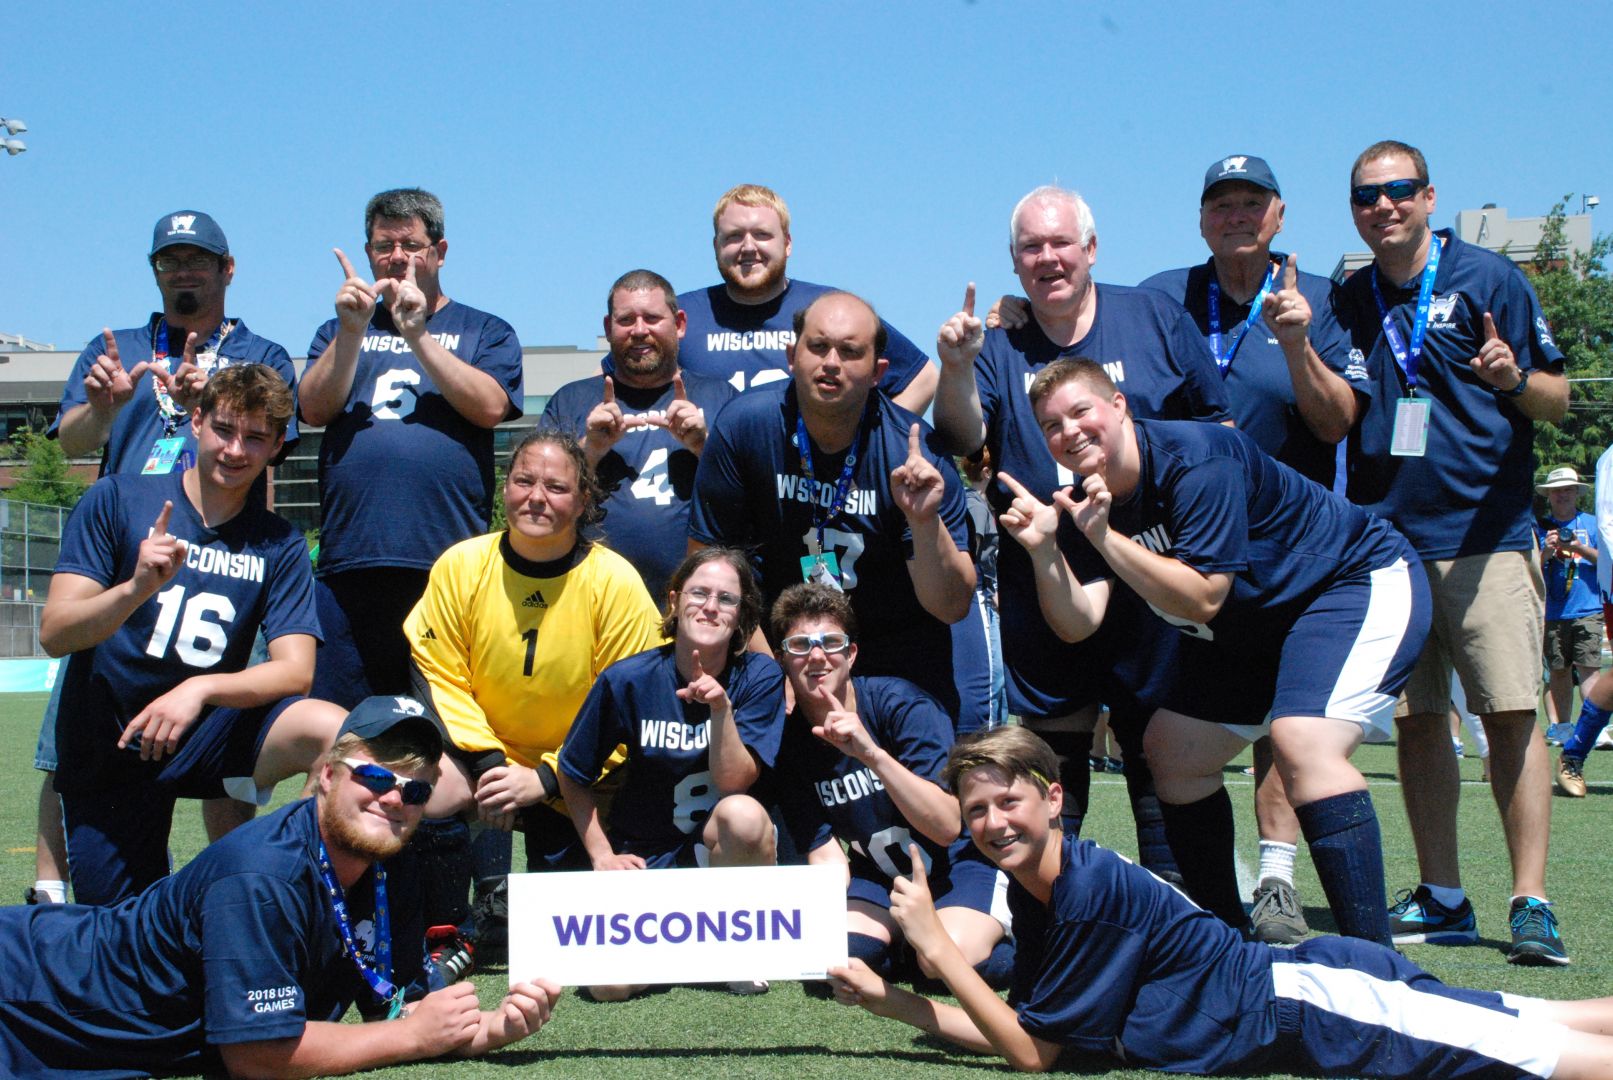 Team Wisconsin poses for a celebratory picture after capturing gold